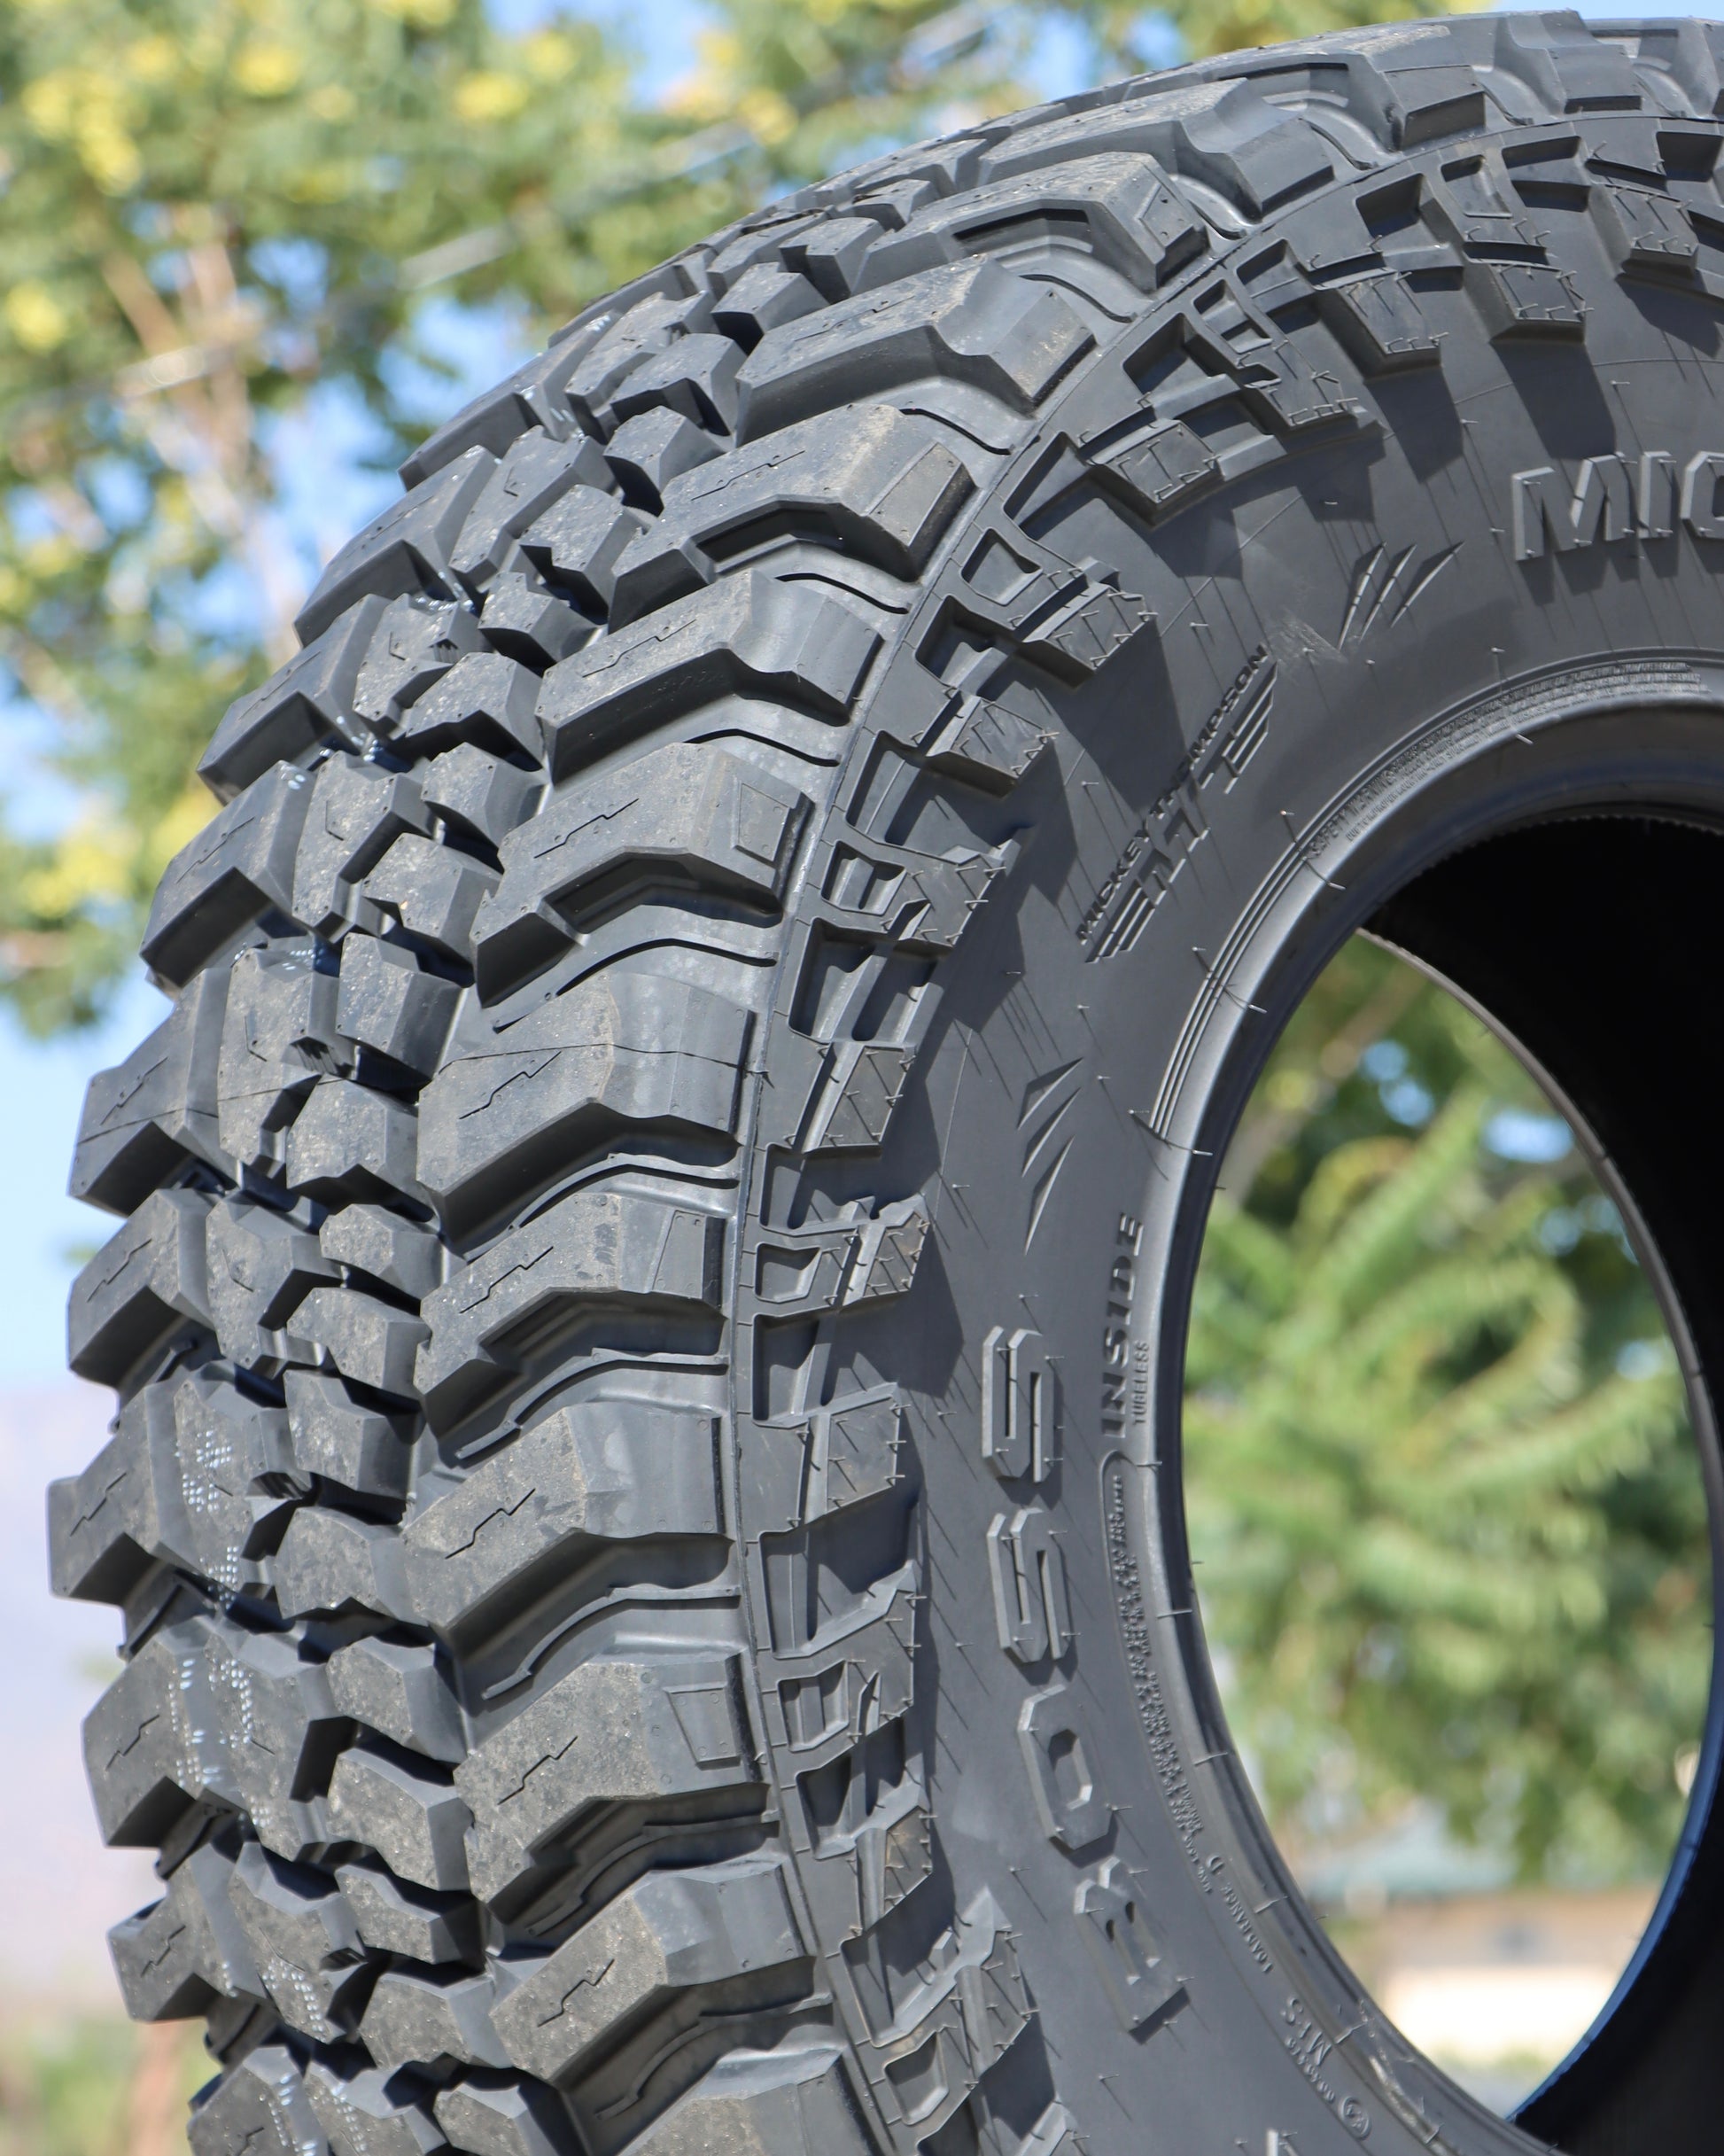 close-up view of the mickey thompson baja boss tire showing the tread and the sidewall.